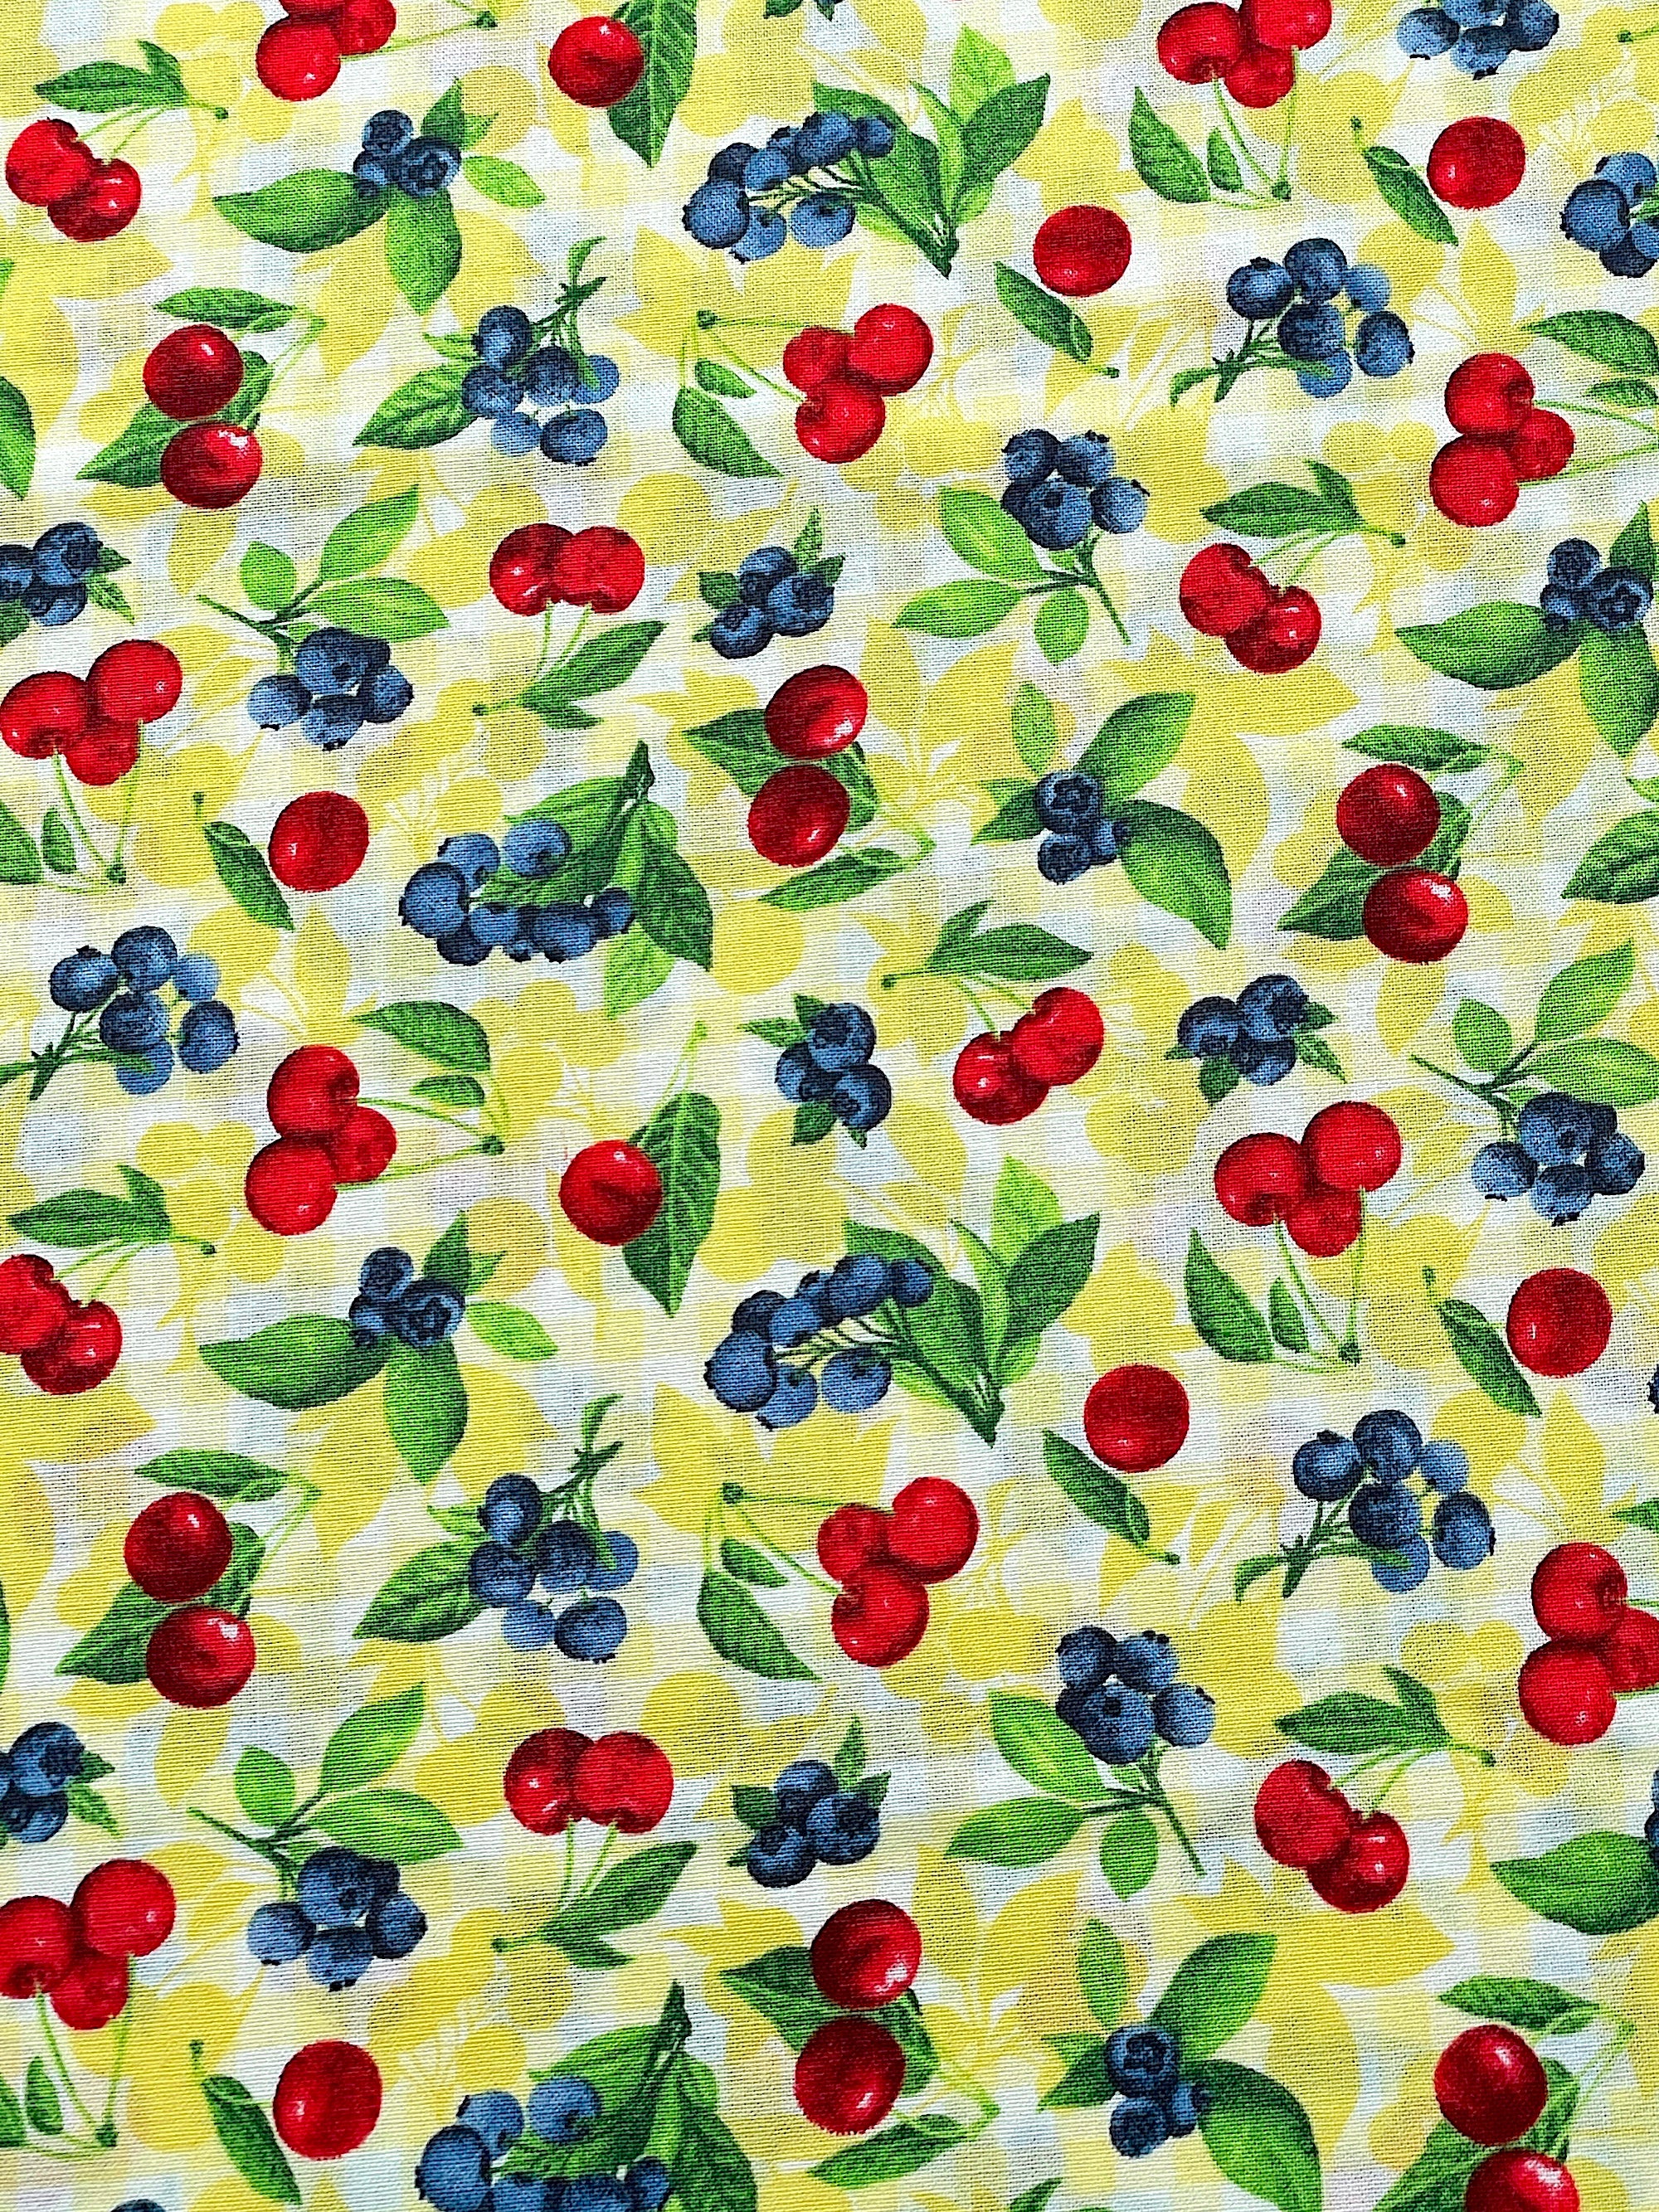 This fabric is part of the Ambrosia Farm collection.&nbsp; This yellow fabric is covered with cherries and blueberries.